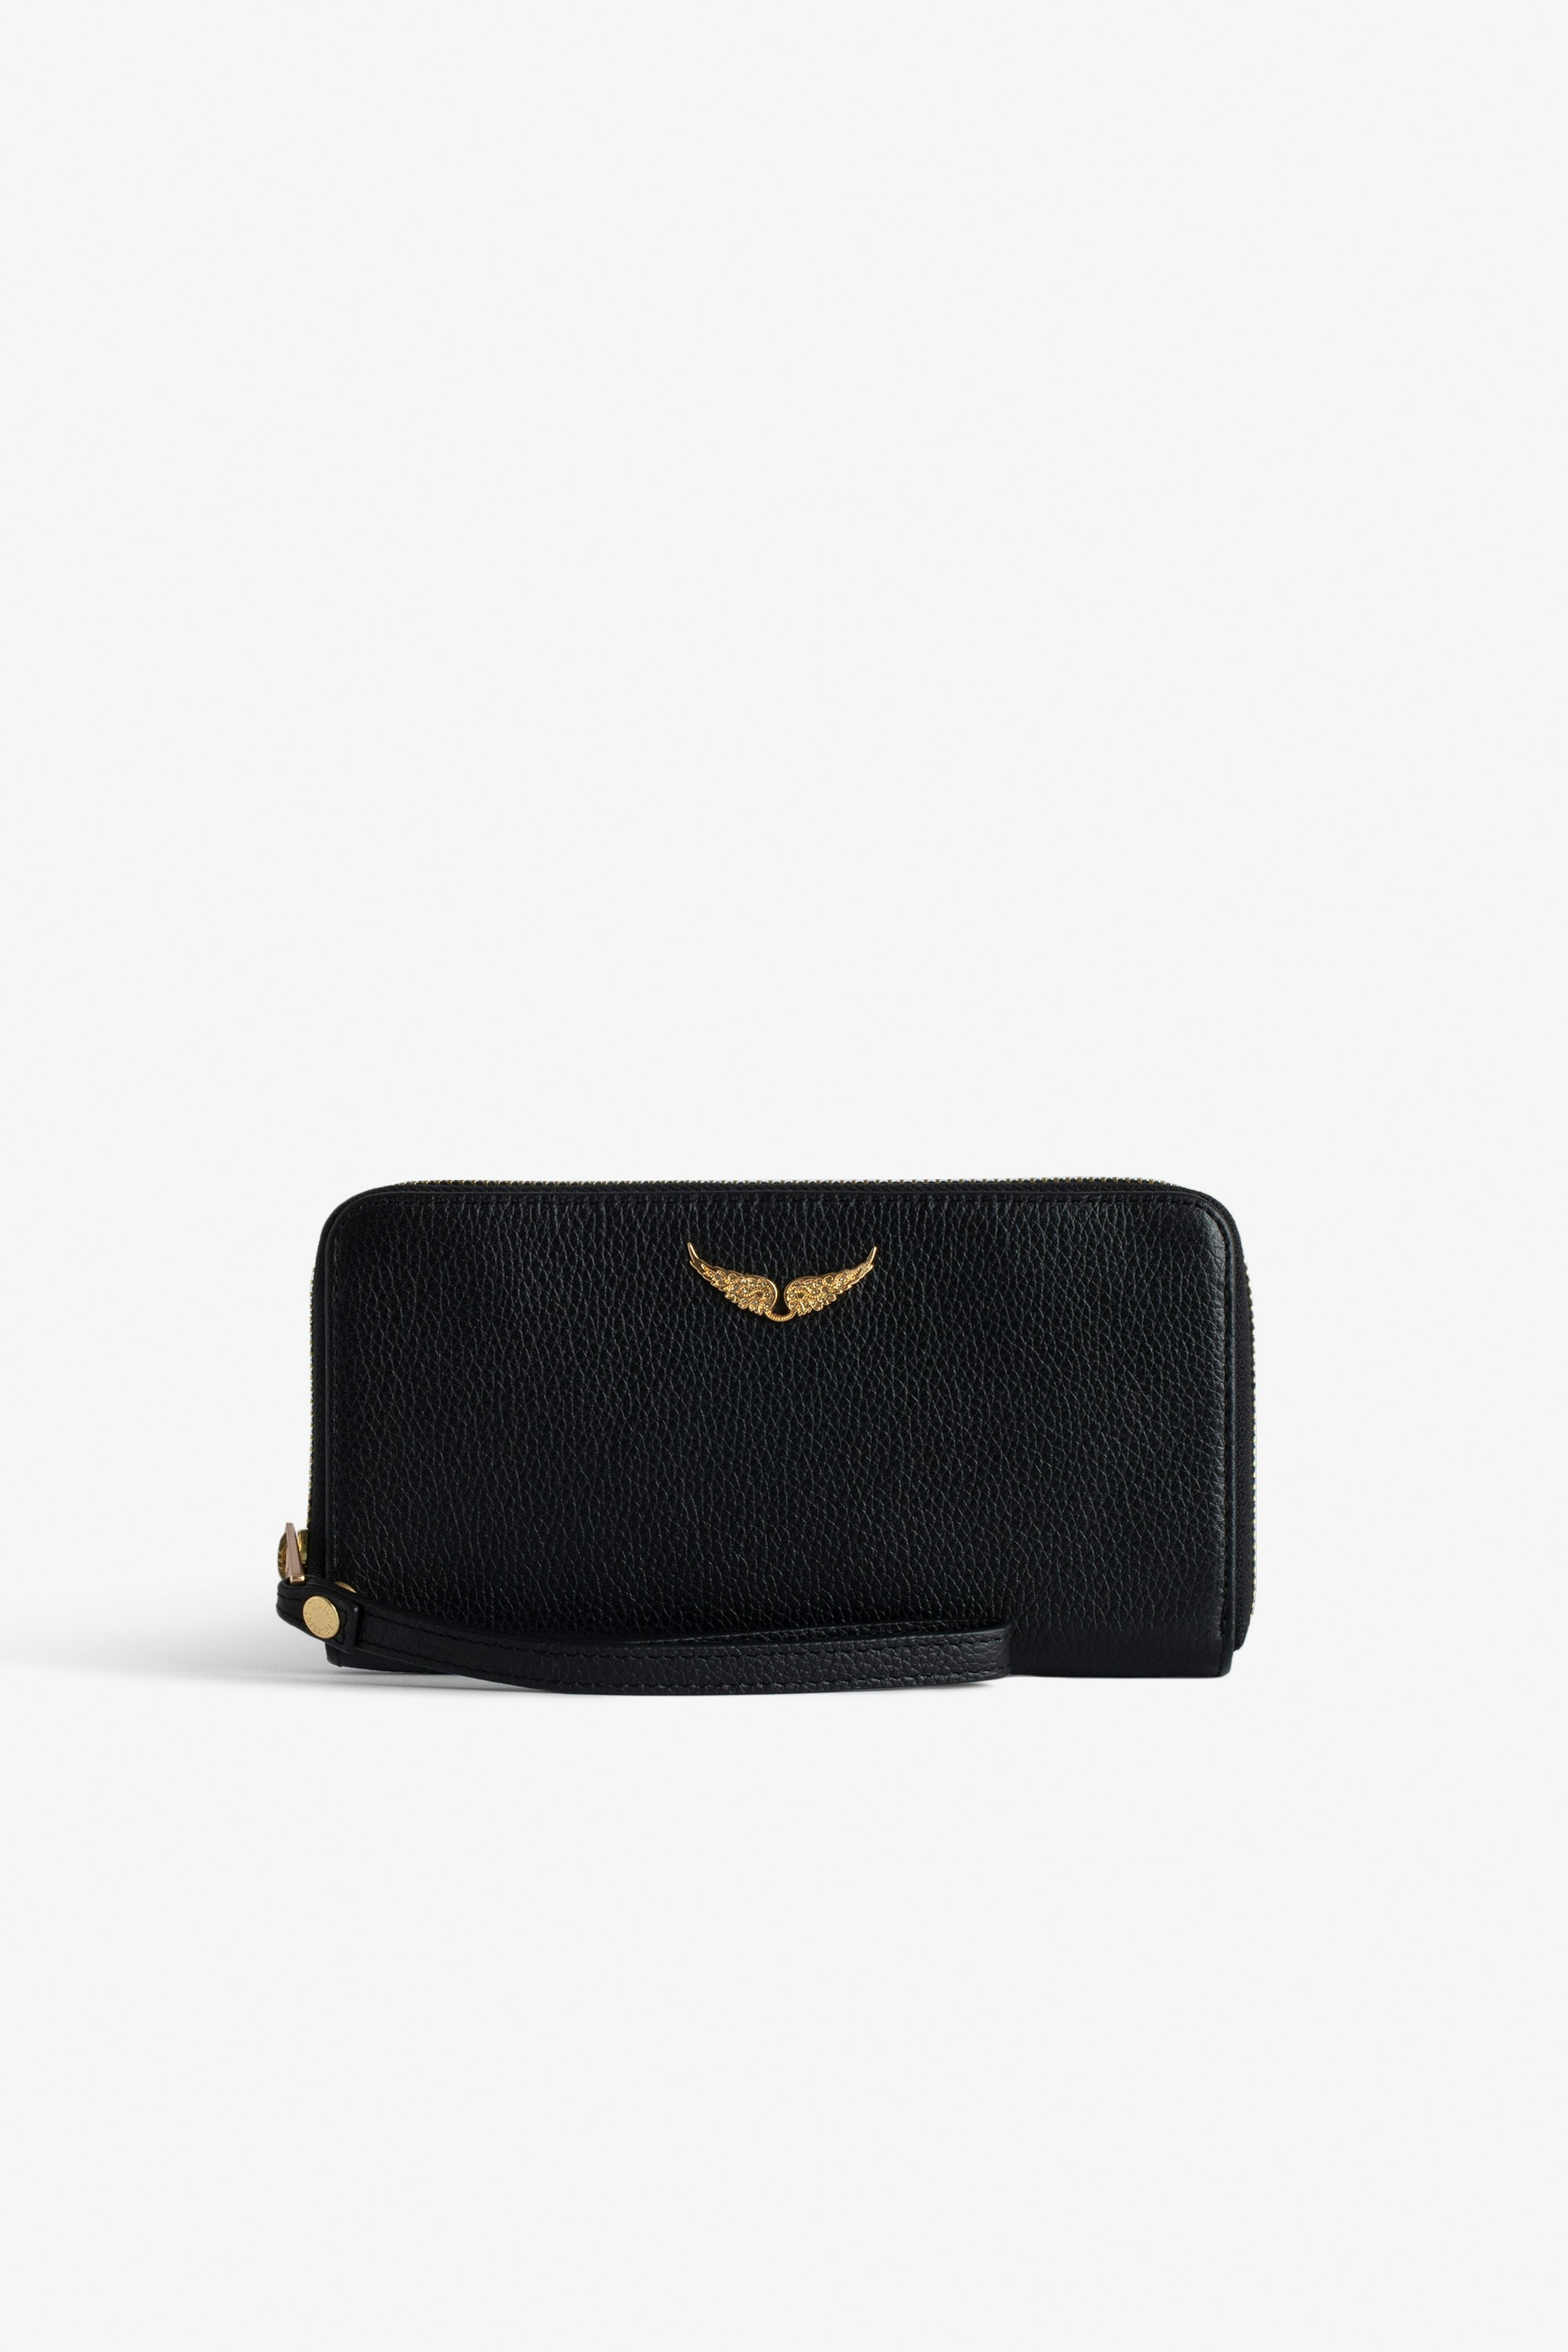 Compagnon Wallet - Women’s black grained leather wallet with wings charm.